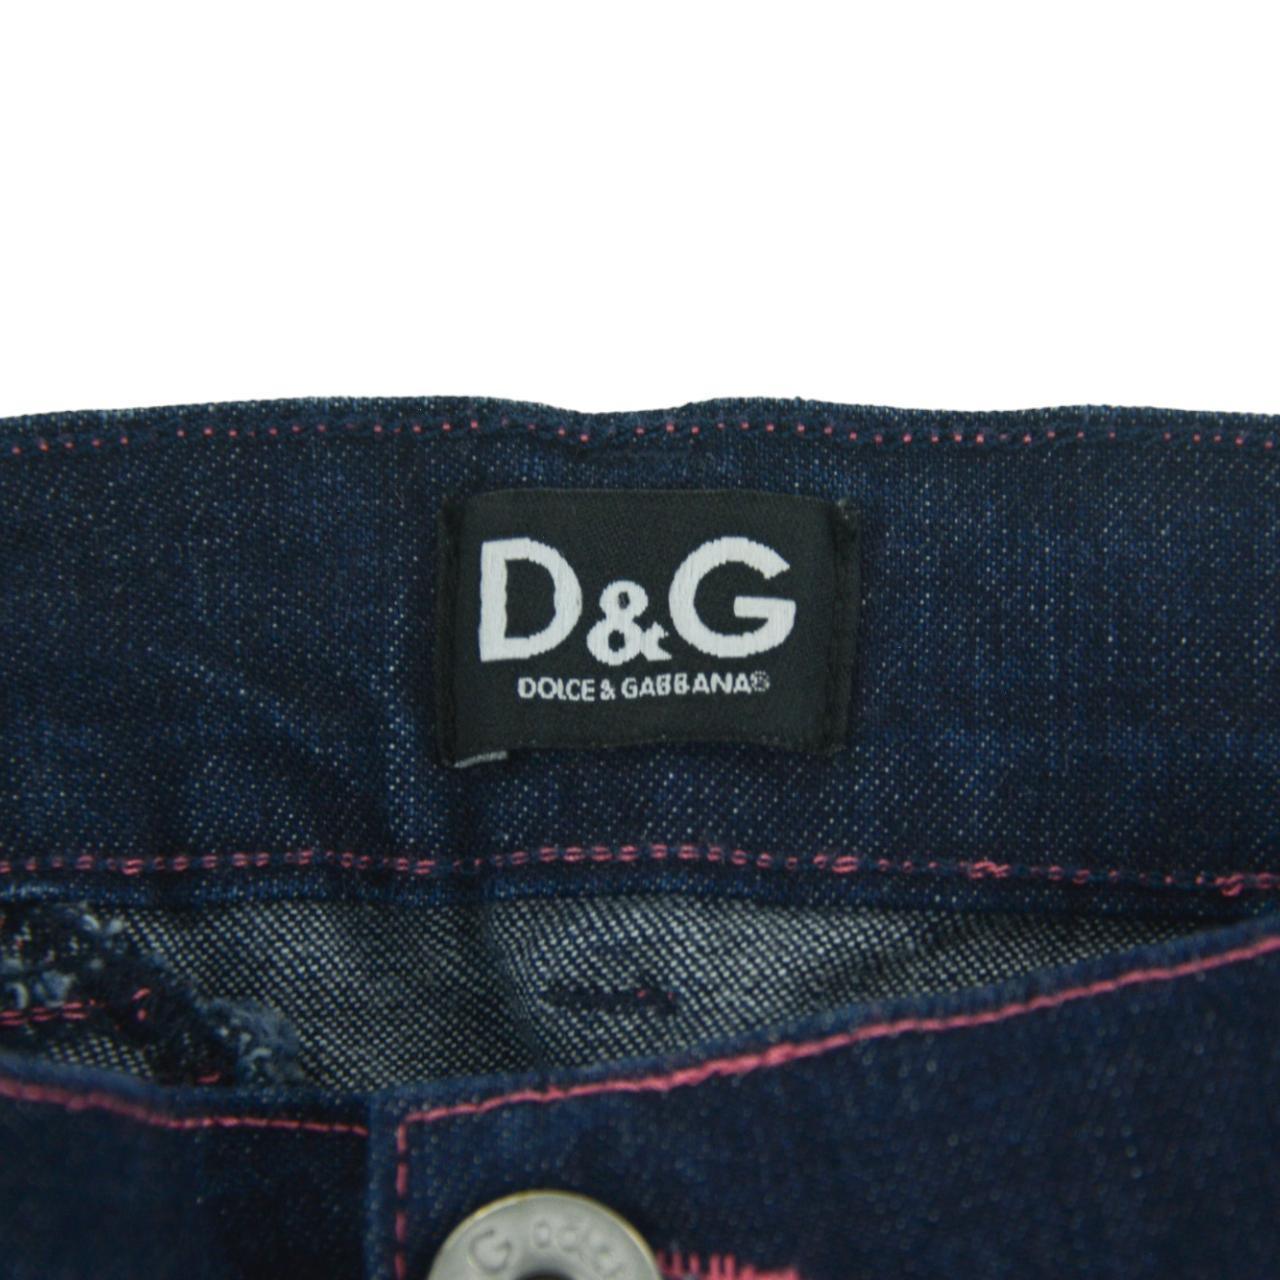 Vintage Dolce and Gabbana Jeans Women's Size W29 - Known Source